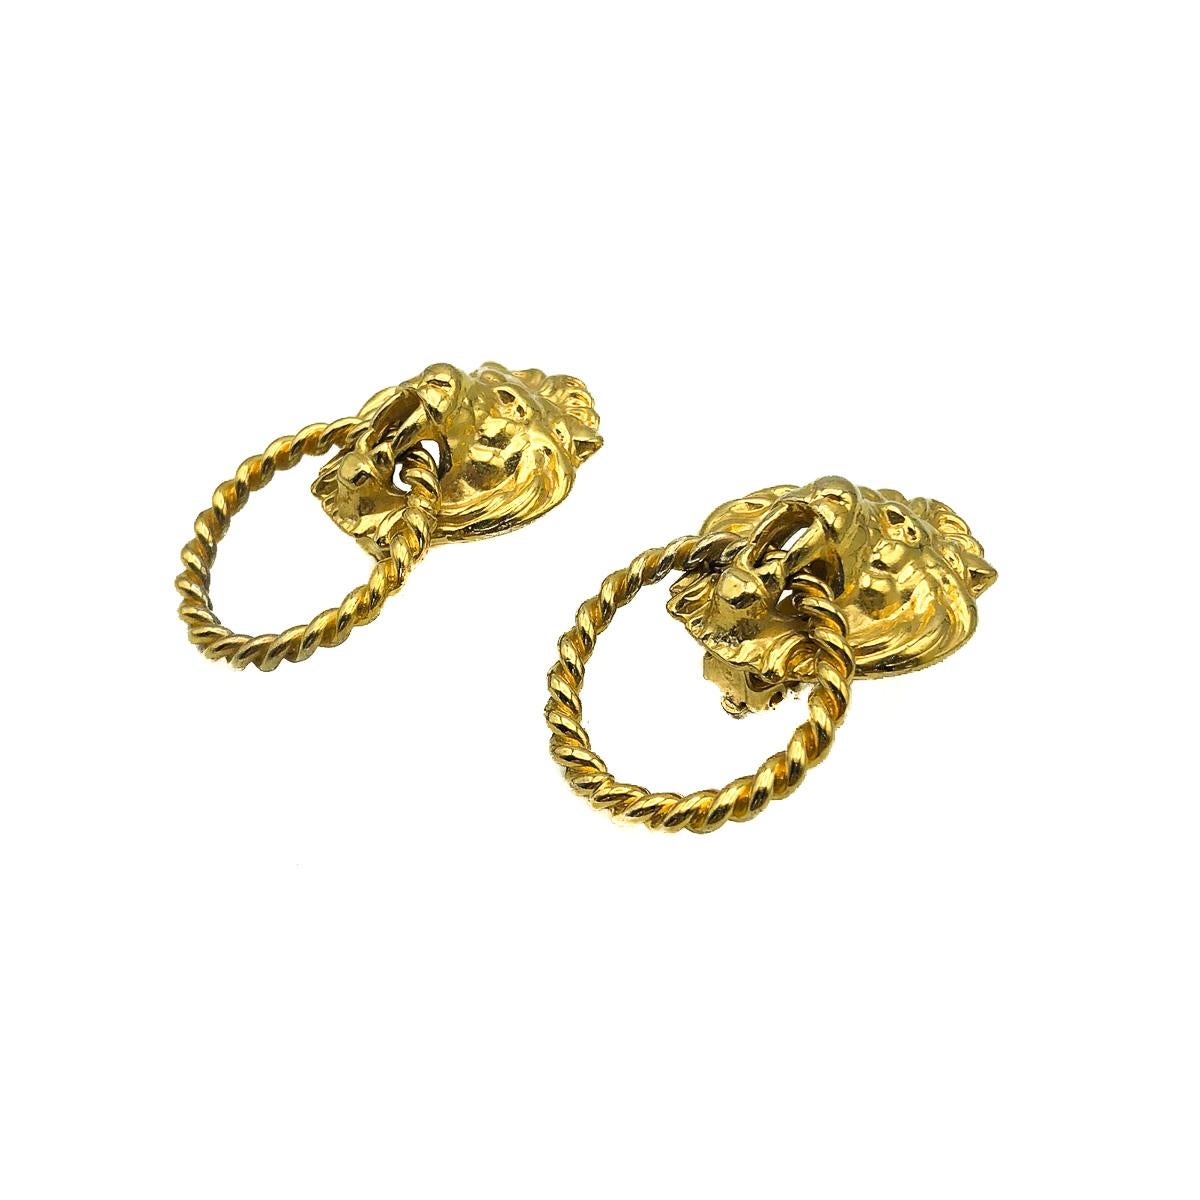 Vintage Lion Knocker Earrings. Featuring a Lion's head with a twisted hoop suspended from the jaw. In gold plated metal. 5cms. High quality. In very good vintage condition. Most likely French. Such a supremely stylish statement earring you can